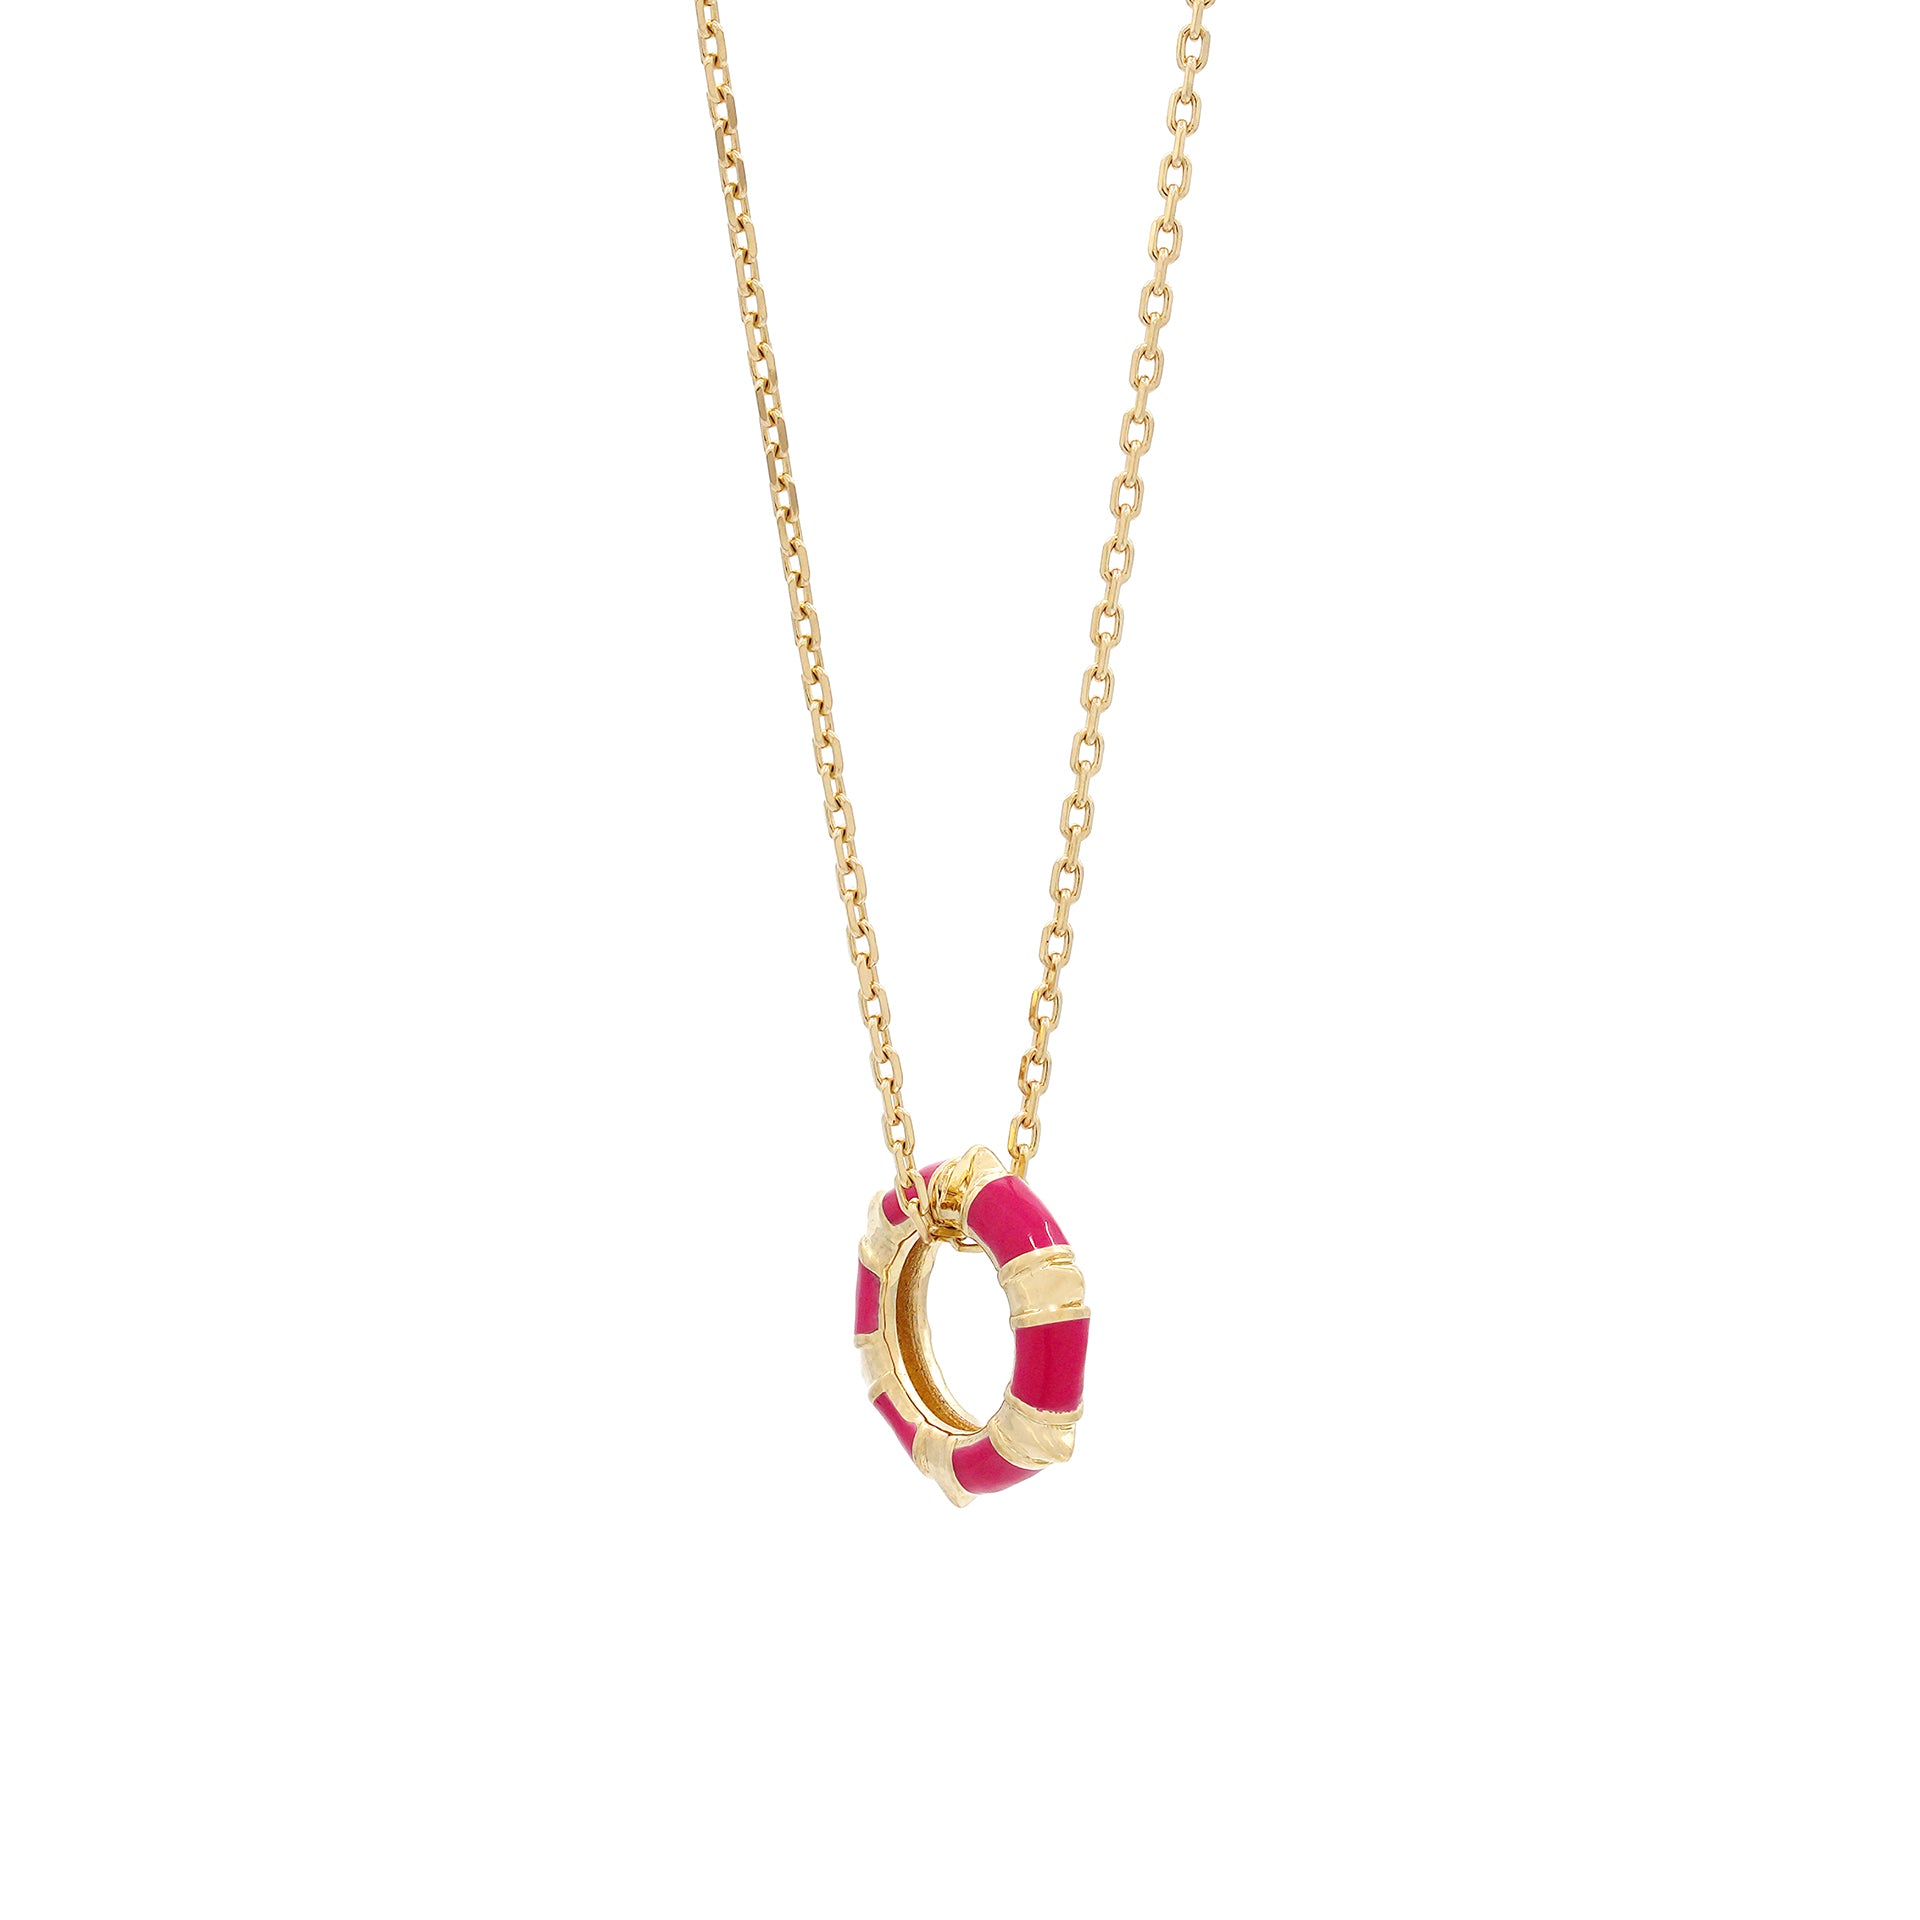 Summer Hues Necklace in Pink